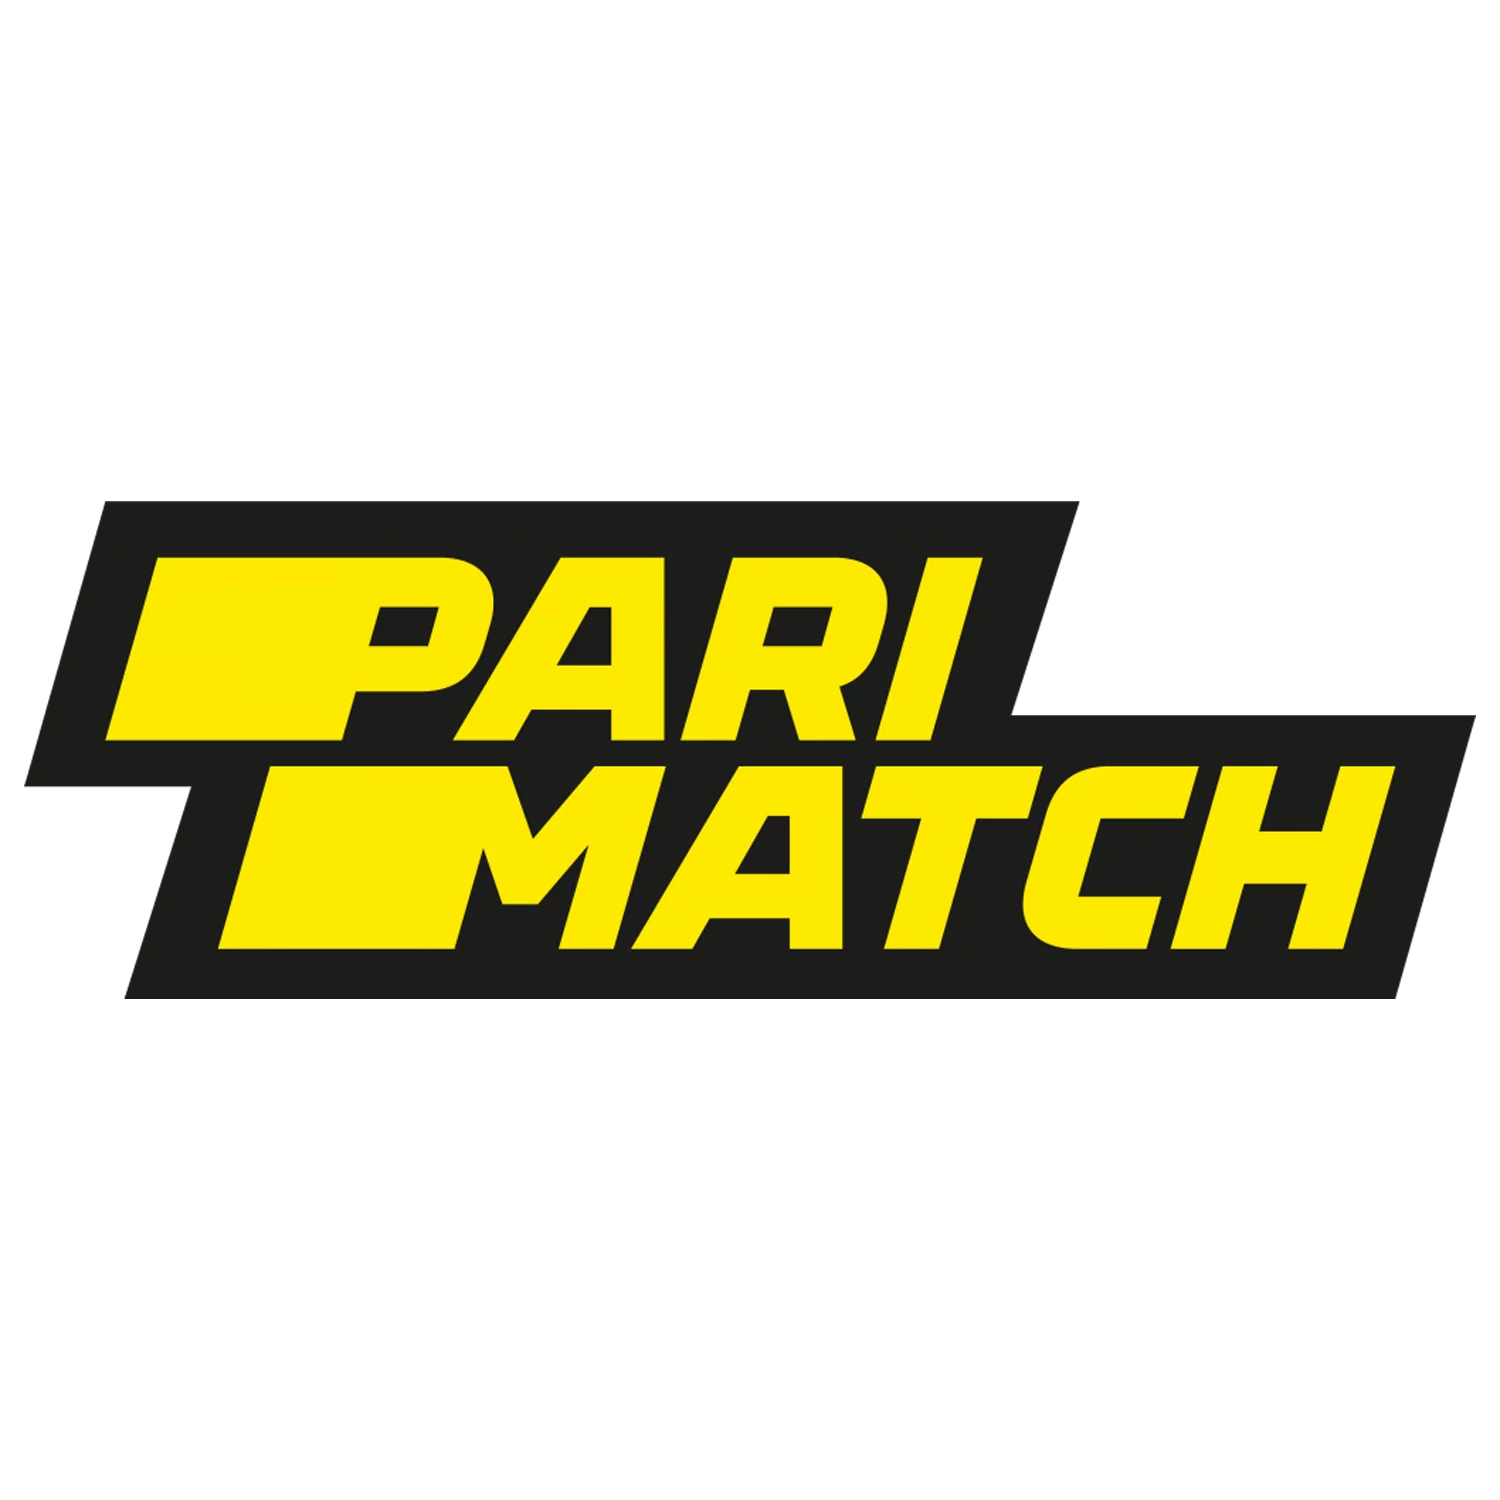 Parimatch is the best bookmaker for Kabaddi in India.